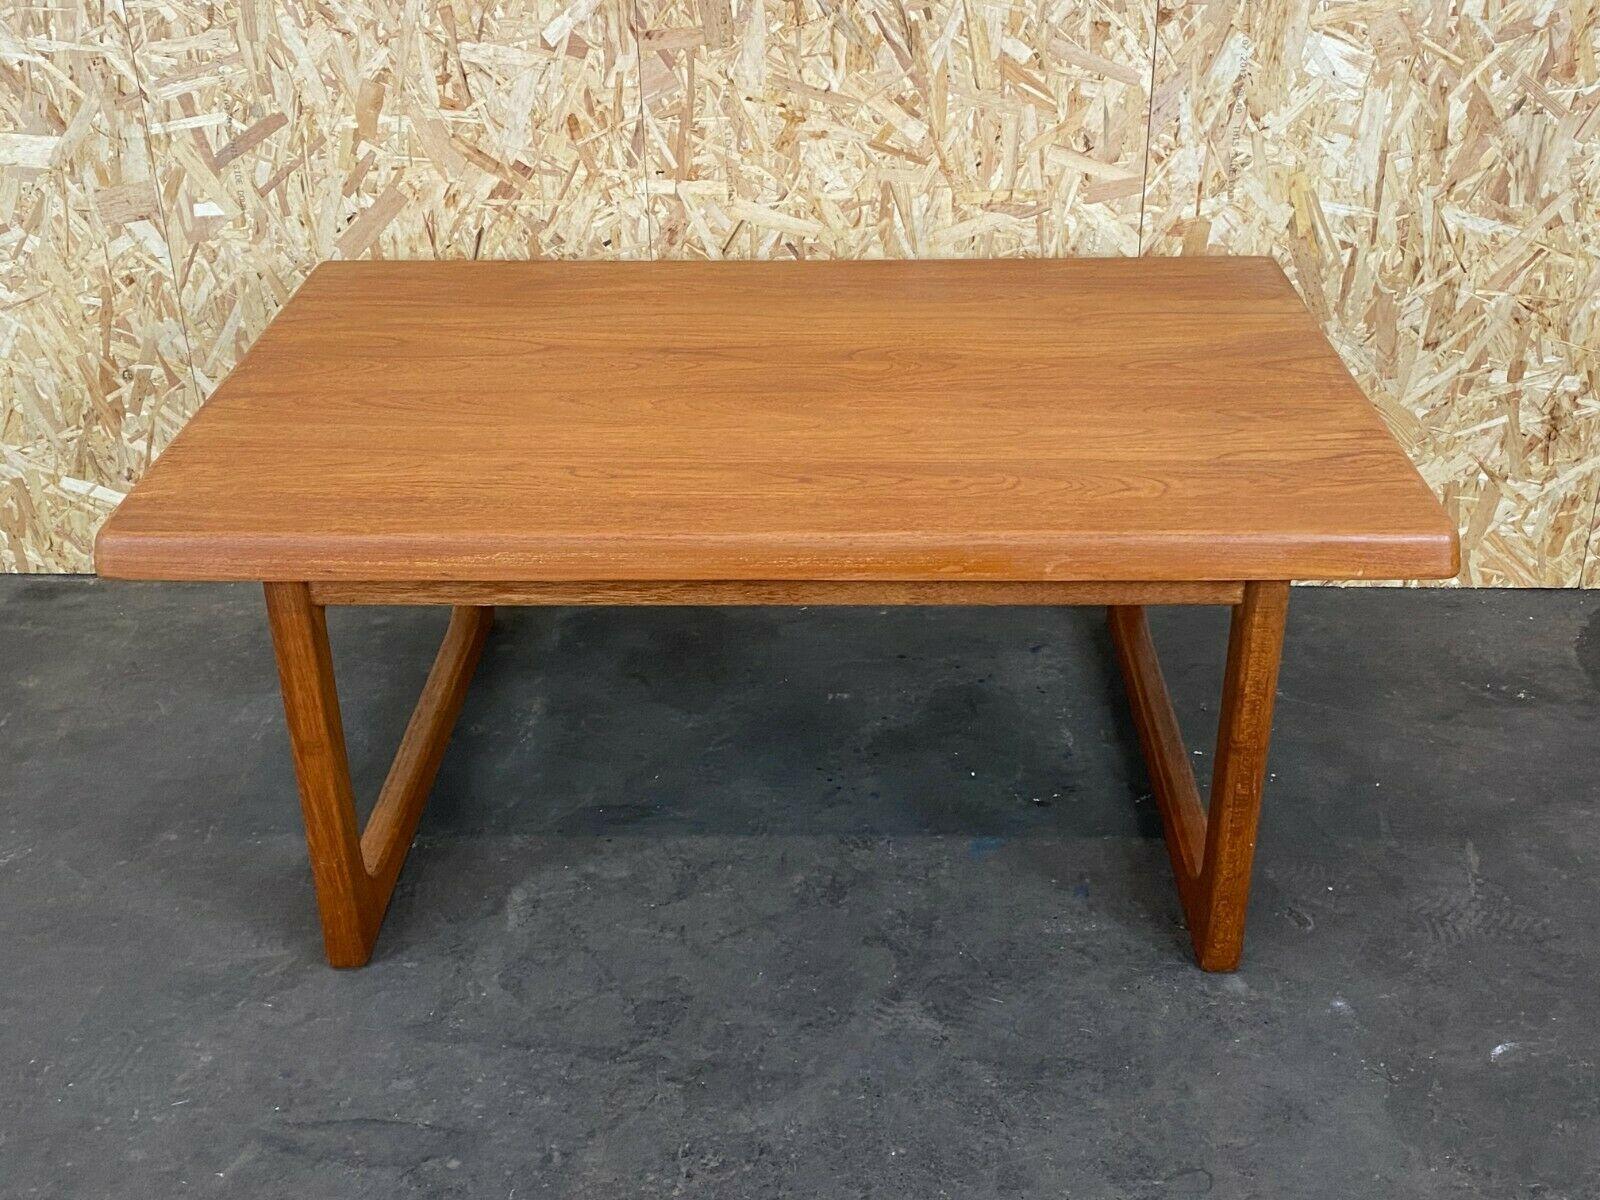 60s 70s teak table side table coffee table Niels Bach Design Denmark

Object: table

Manufacturer: Niels Bach

Condition: good

Age: around 1960-1970

Dimensions:

120cm x 79cm x 50cm

Other notes:

The pictures serve as part of the